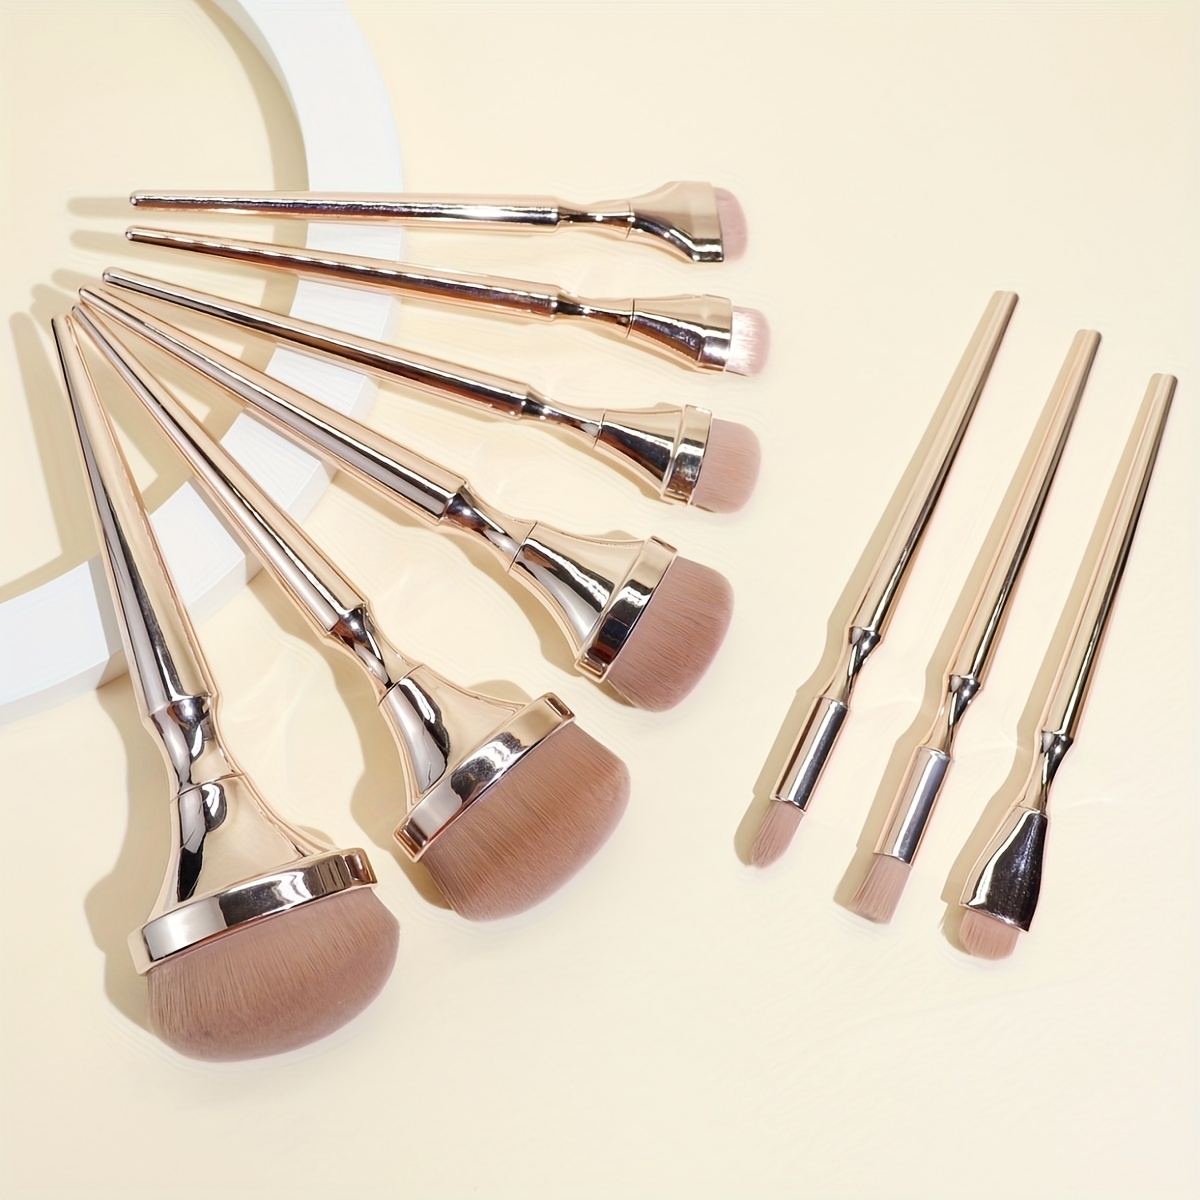 

9 Pieces Rose Golden Makeup Brush Set - Perfect For Blending, Buffing, And Applying Foundation, Concealer, Eyeshadow, And Lipstick